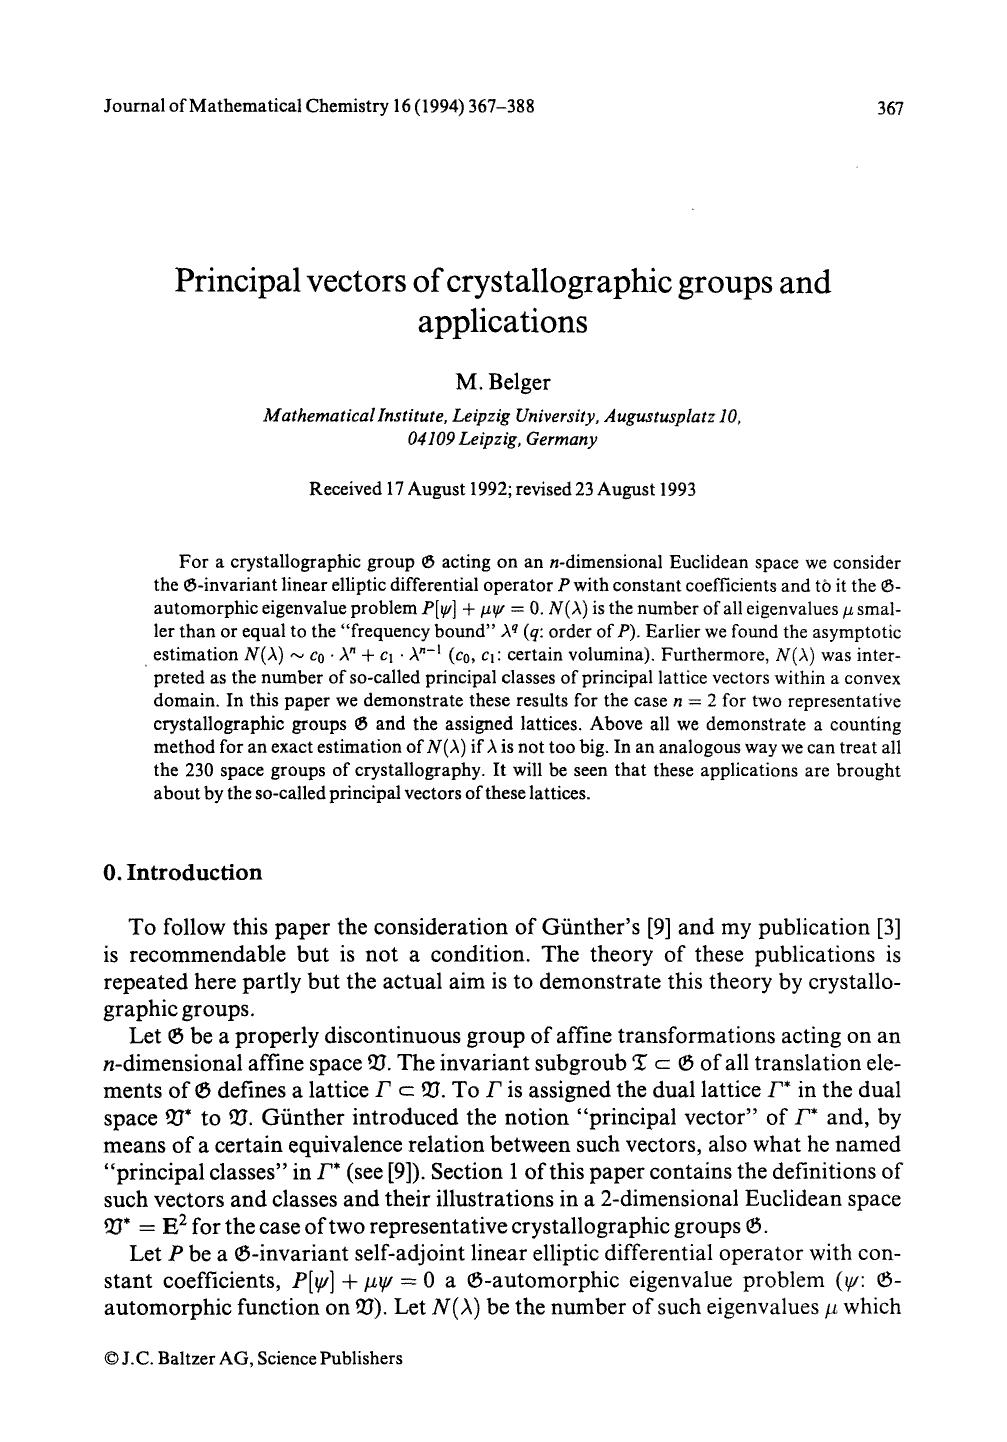 Principal vectors of crystallographic groups and applications by Unknown